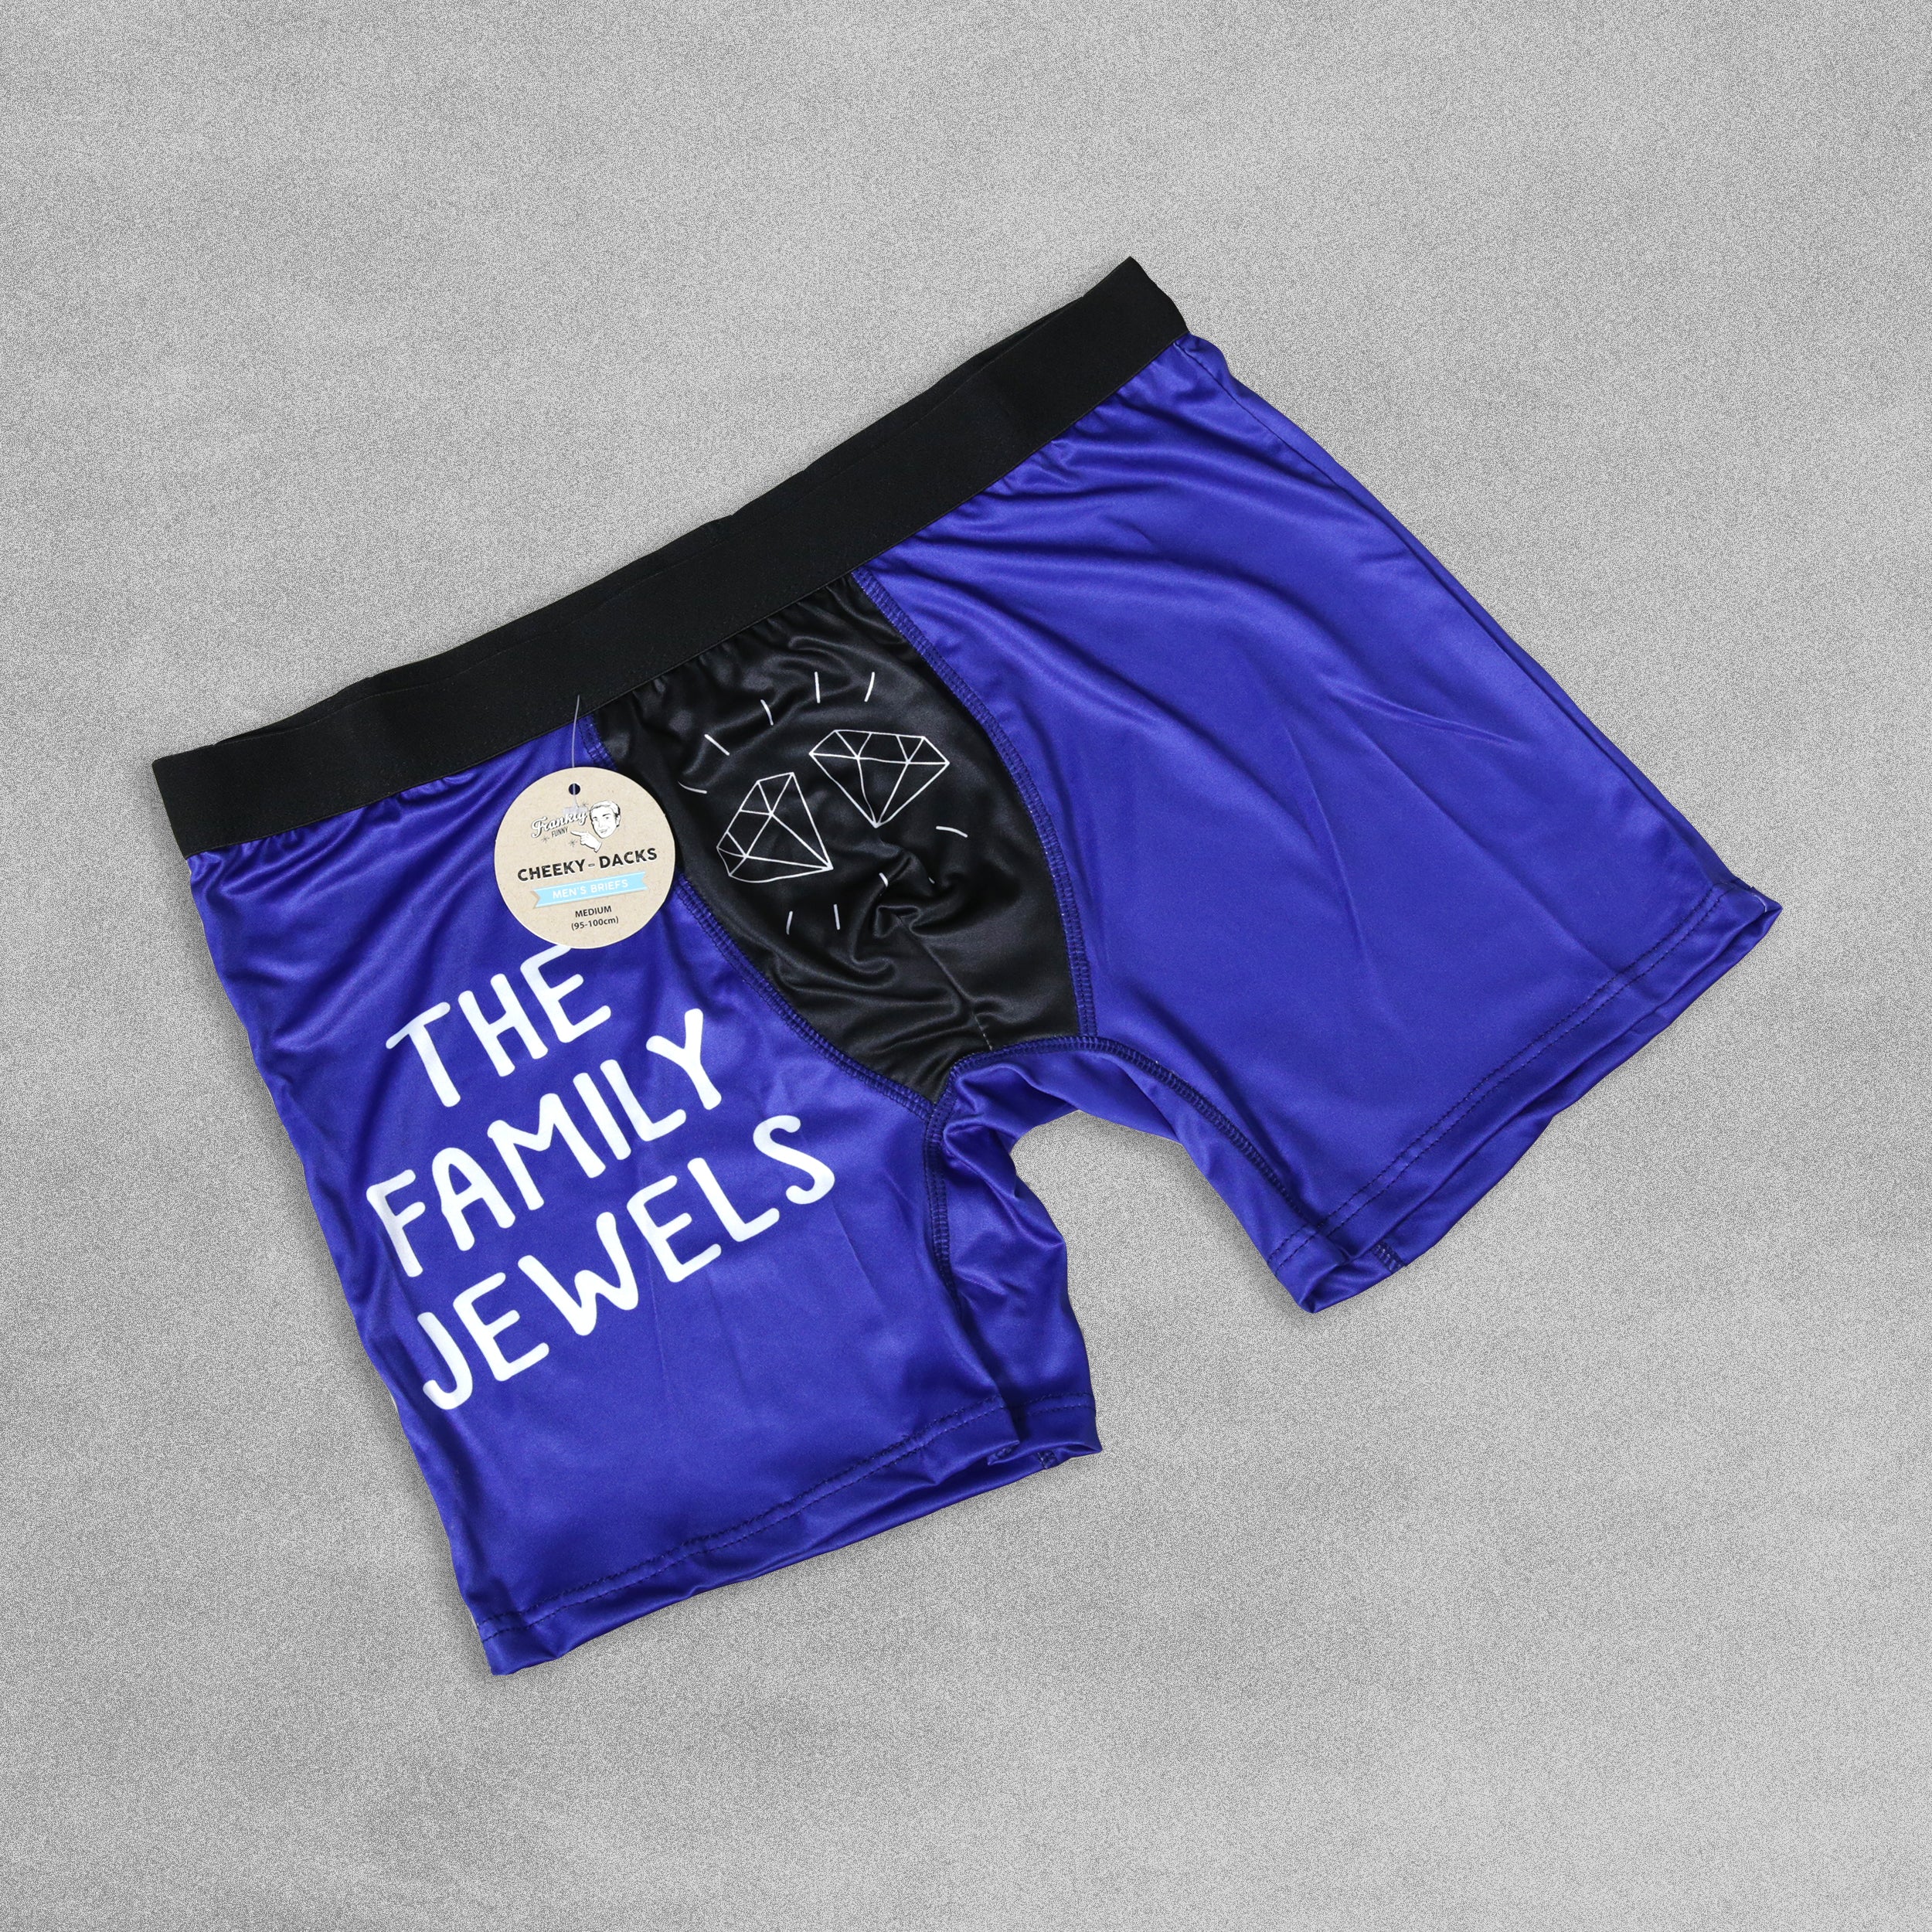 Mens Novelty Boxer Shorts - The Family Jewels!